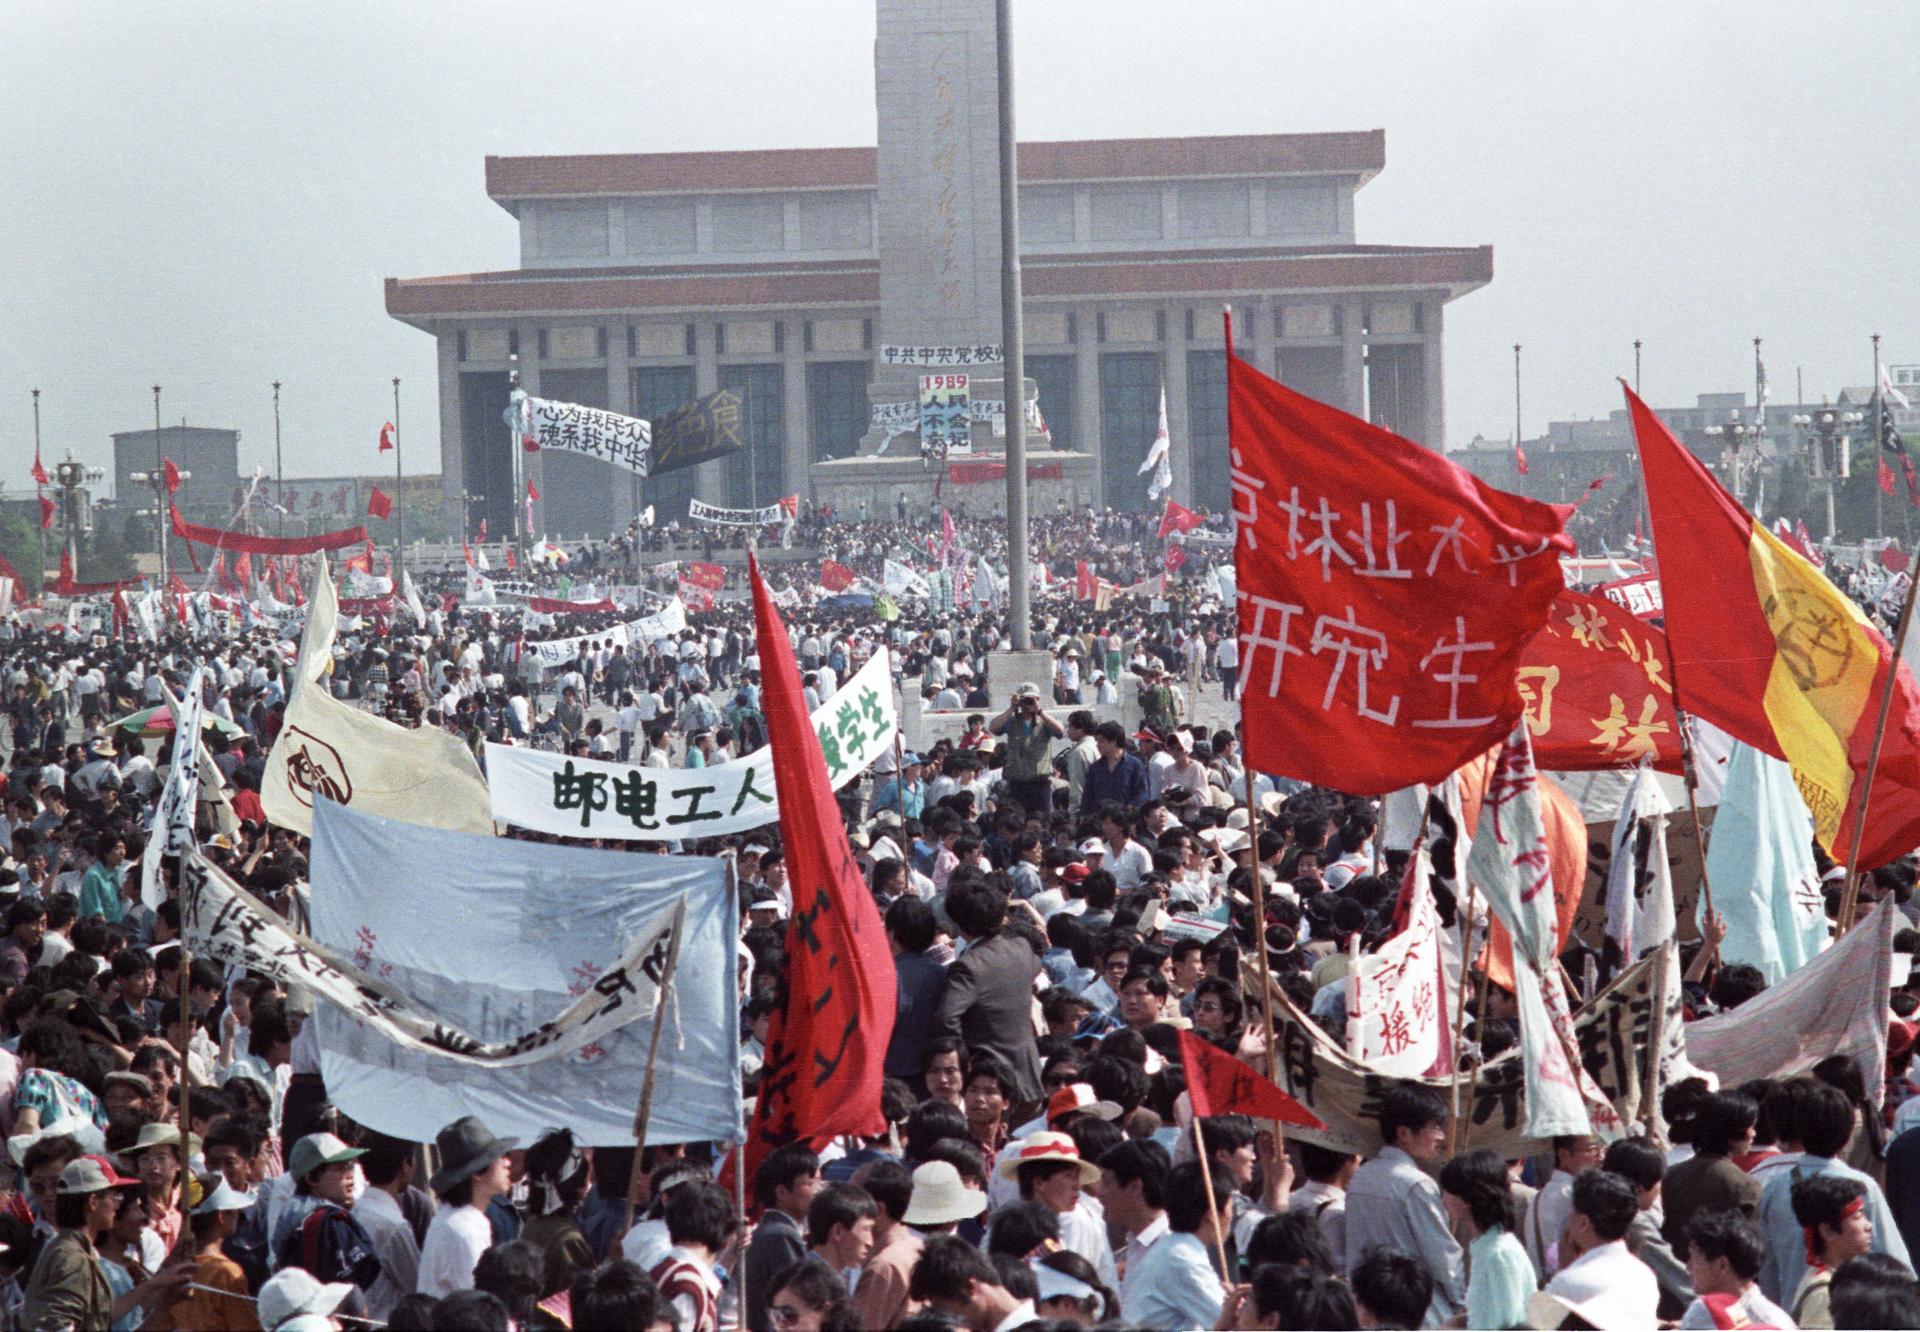 Crowds protest in Tiananmen Square carrying banners written in Chinese.